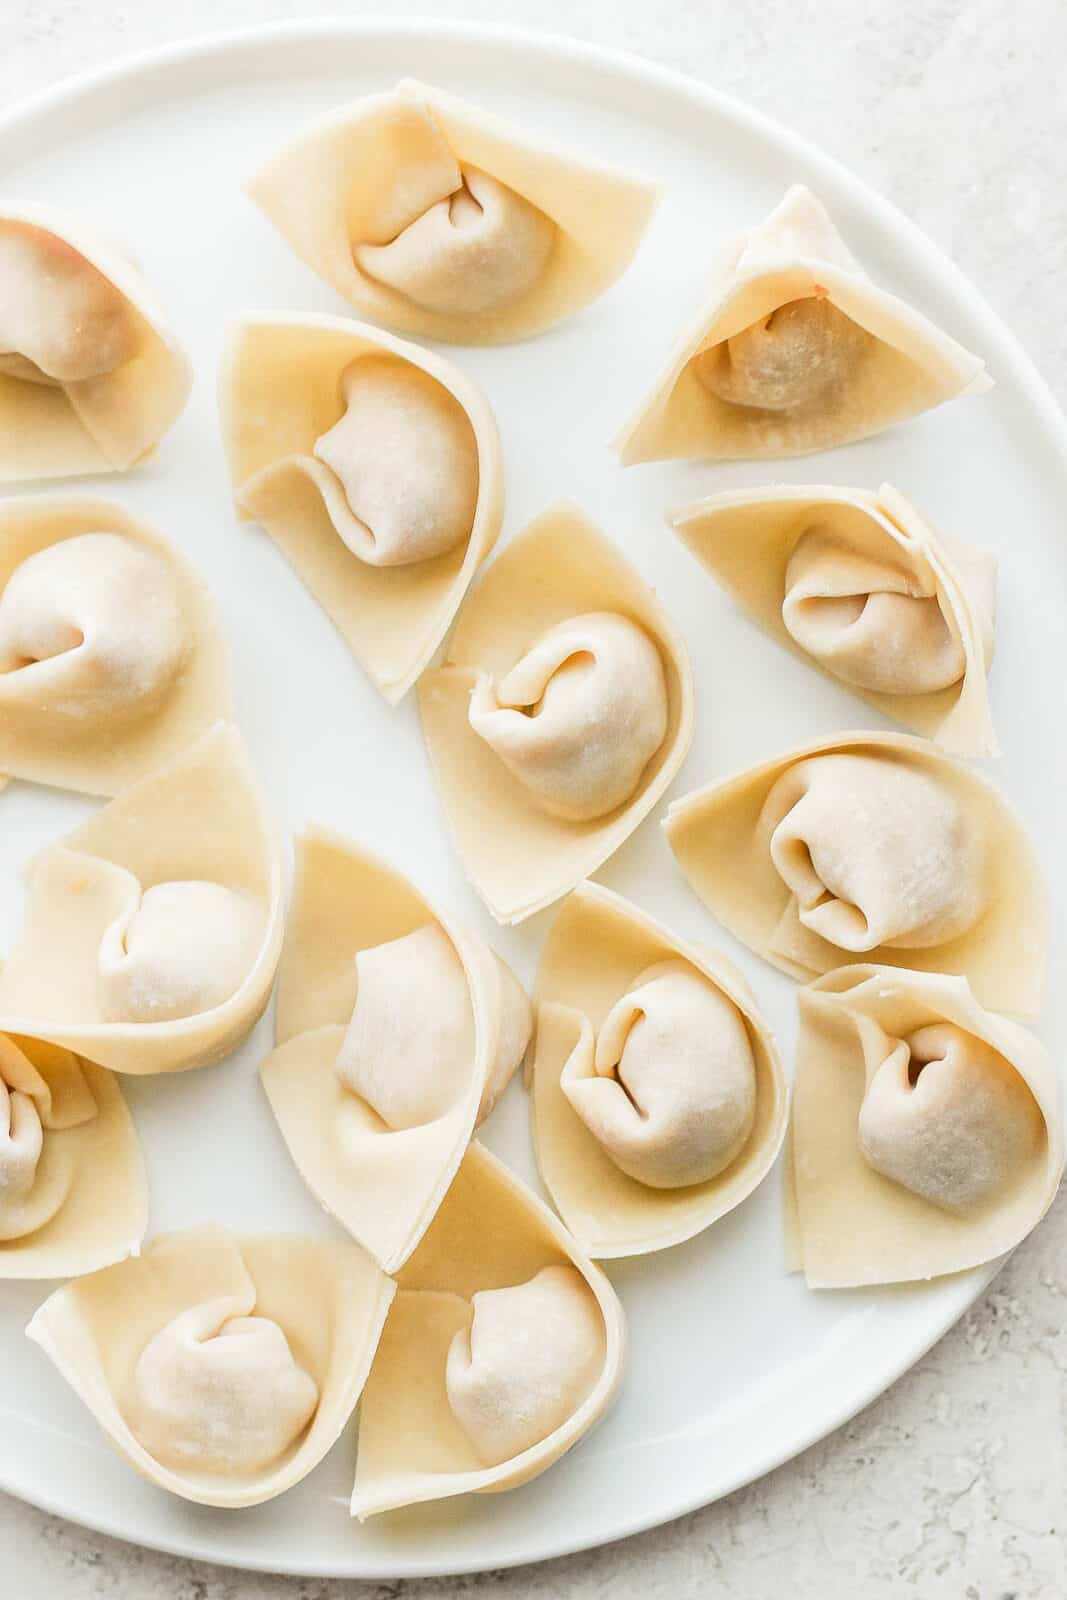 A plate of pork wontons before cooking.